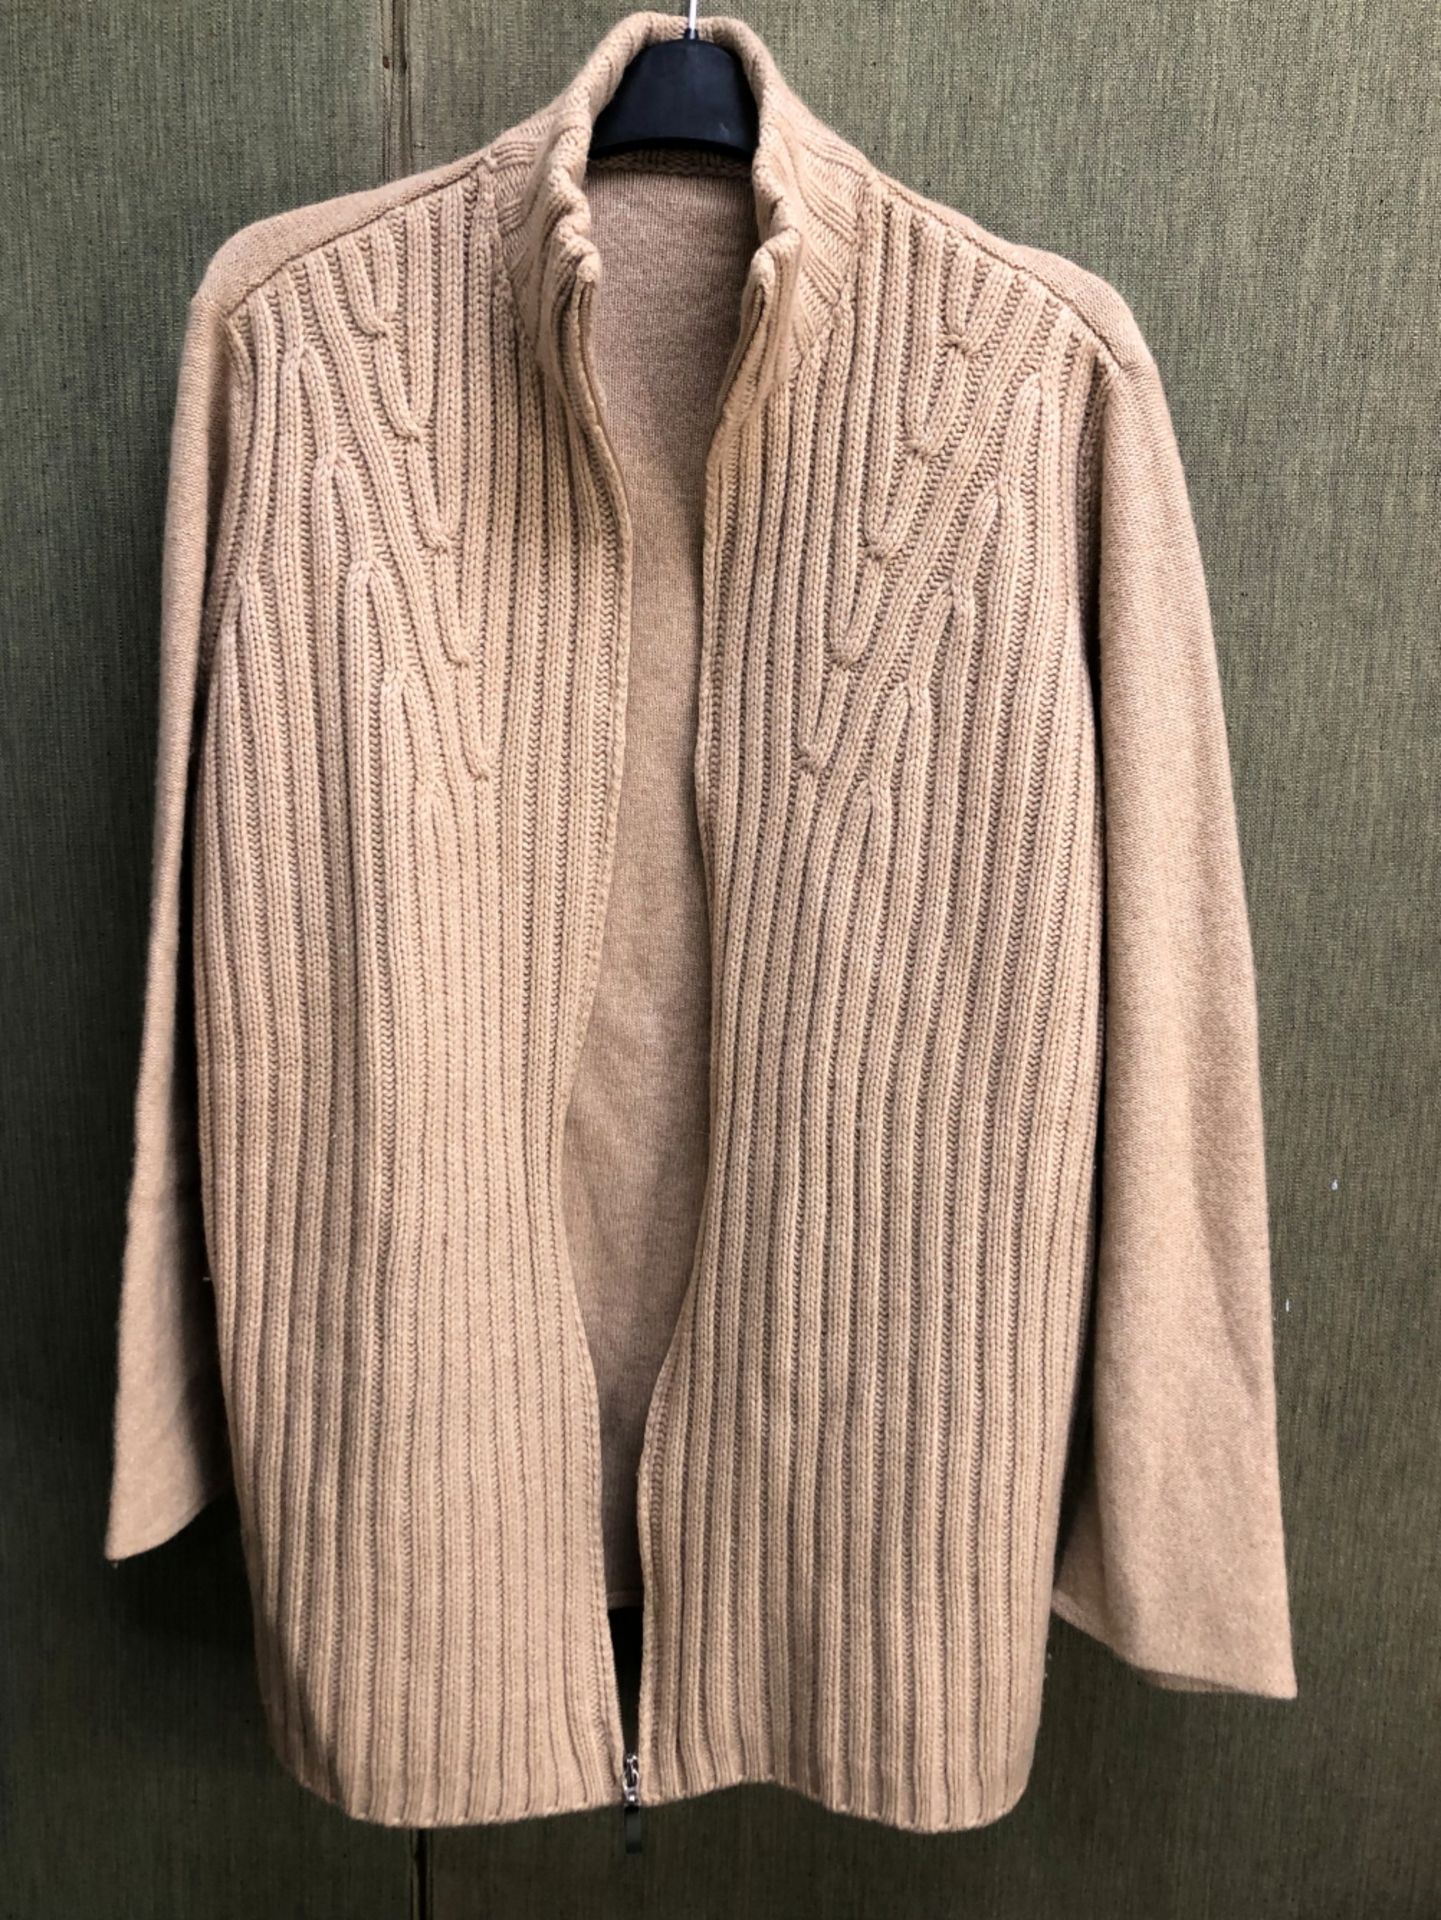 A JOHNSTONS CASHMERE 44" CABLE KNIT CARDIGAN, A KNITTED CARDIGAN WITH NECK TIE, A TSE CASHMERE - Image 11 of 16